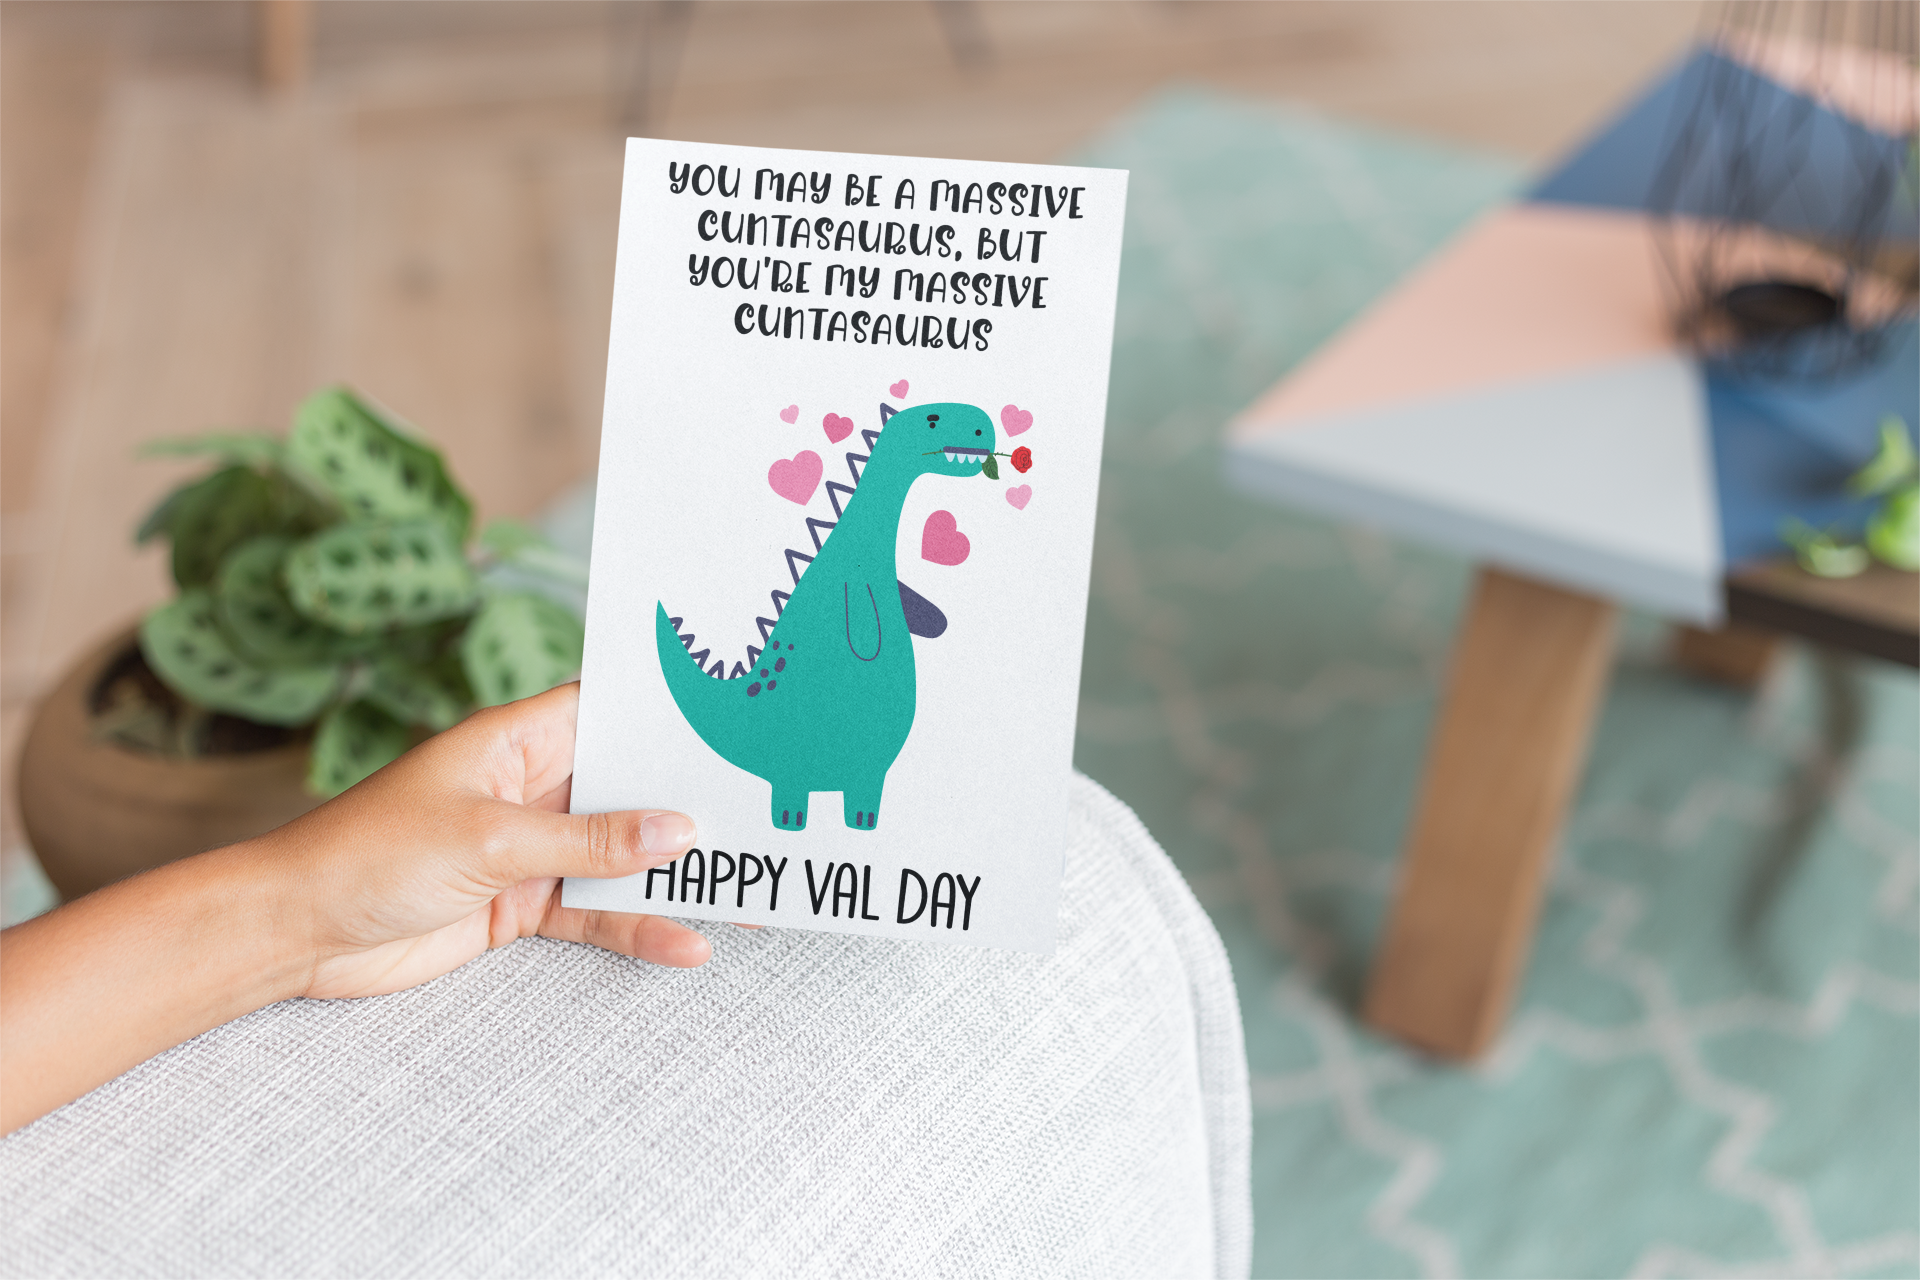 A5 glossy white card with a valentines dinosaur design to the front. The quote reads 'you may be a massive cuntasaurus, but you're my massive cuntasaurus'. With happy val day situated at the bottom. The inside is left blank.